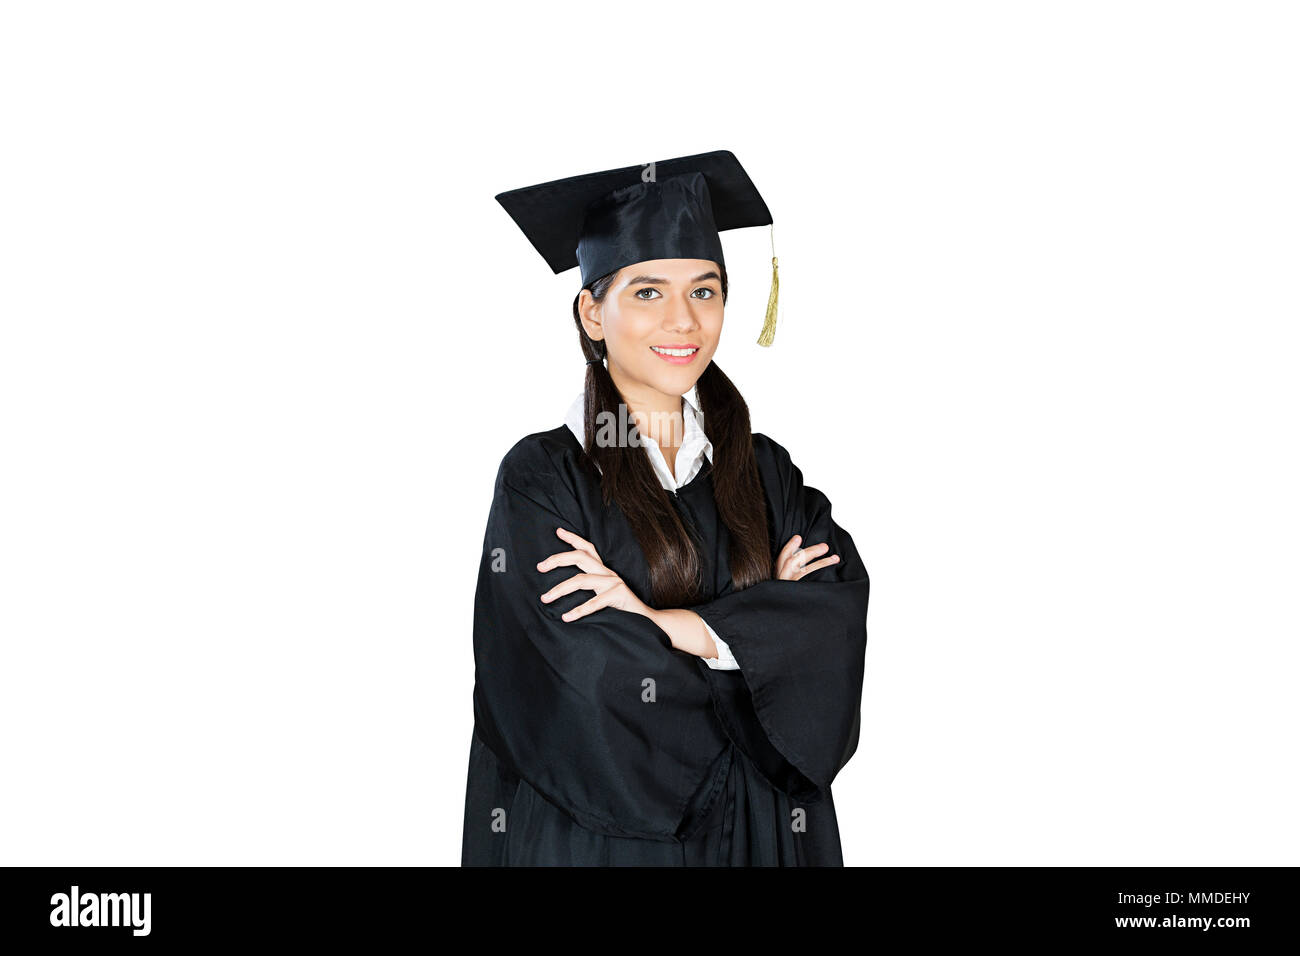 One Teenager Girl College Student Graduation Complete Holding Degree Certificate Stock Photo